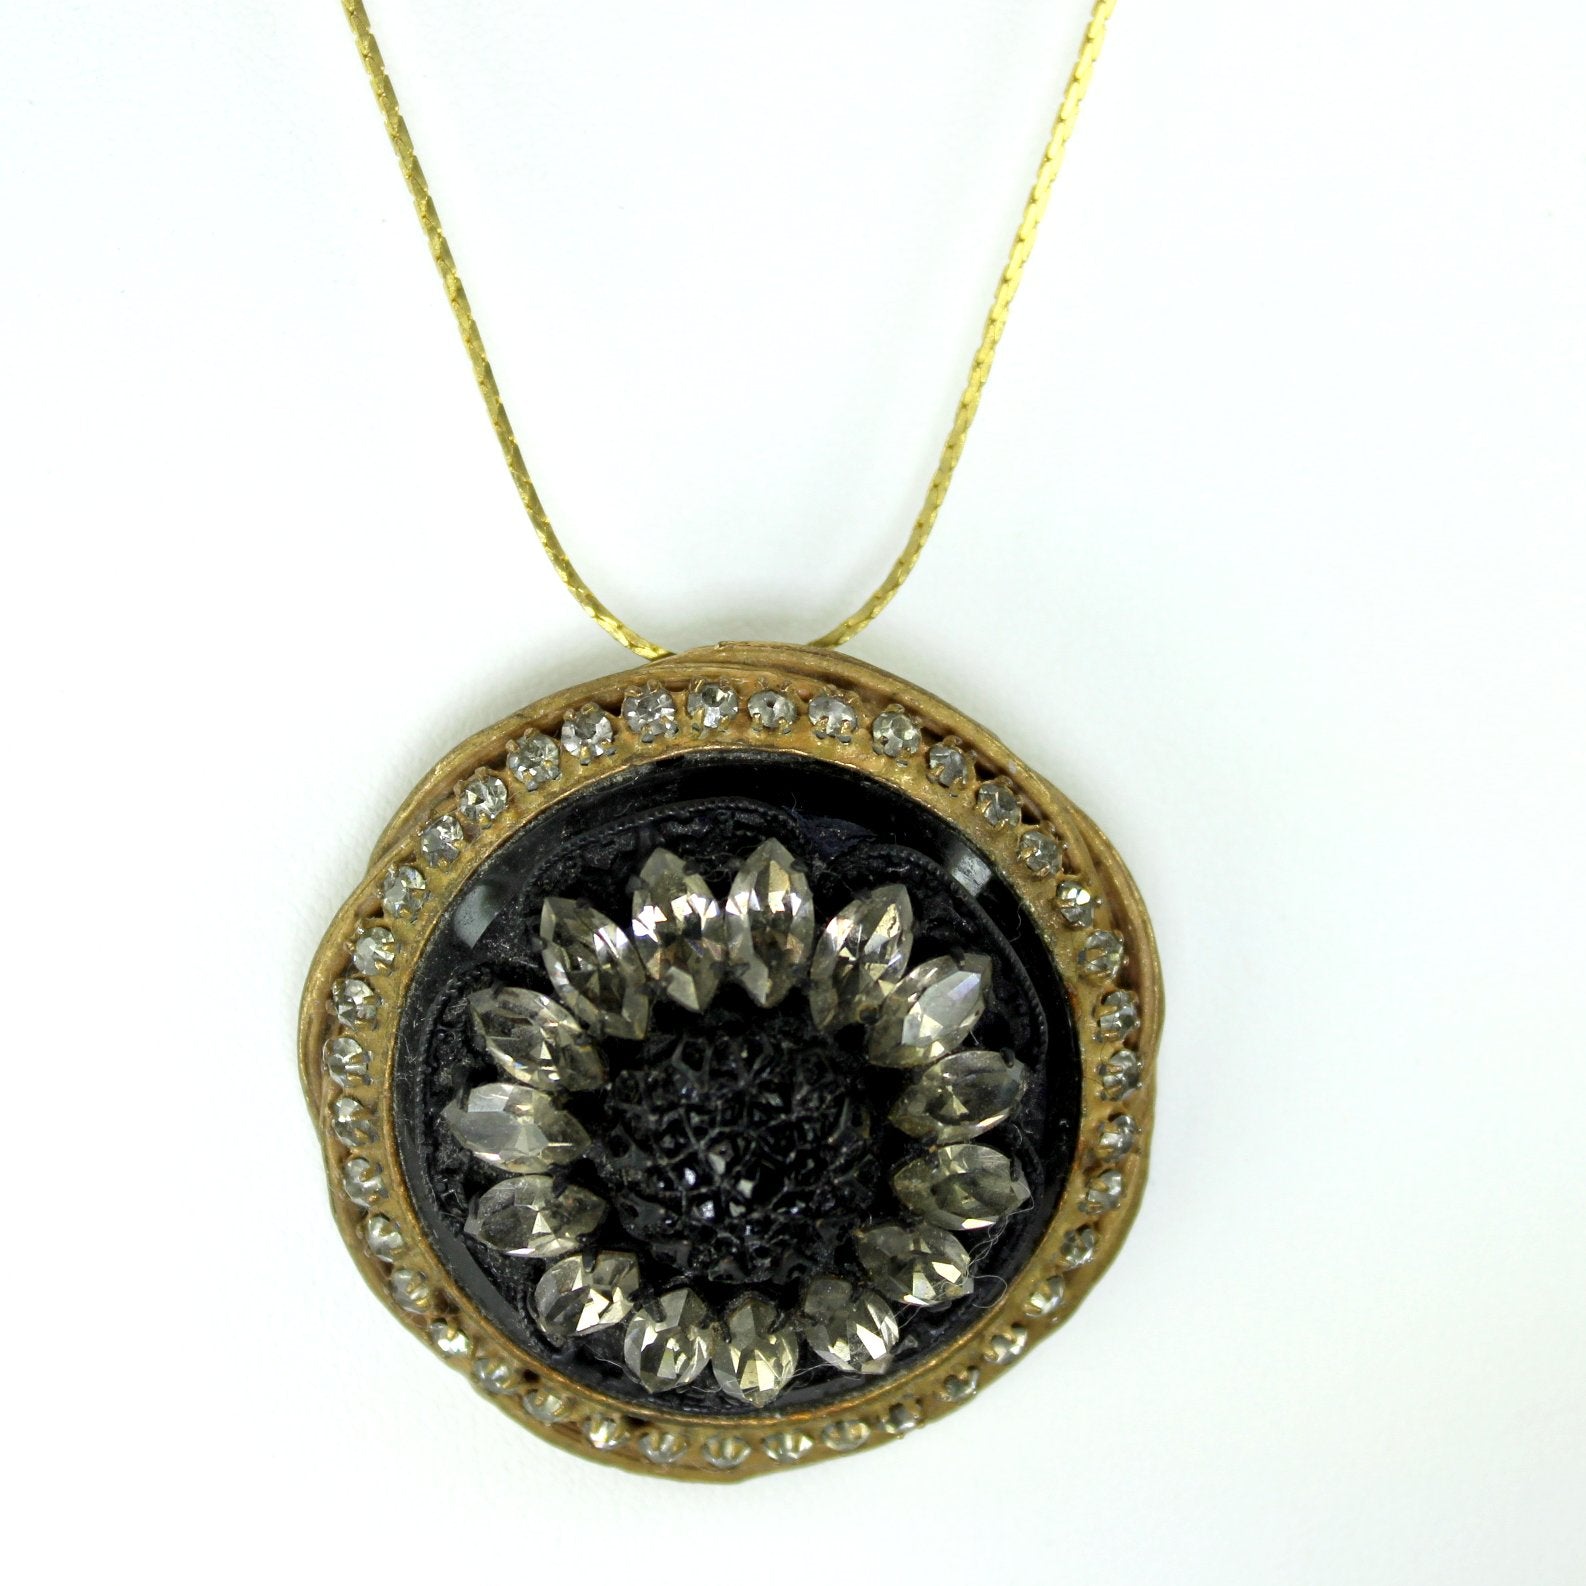 Original By Robert Pendant Necklace Victorian Mourning Style Special Price closeup of pendant